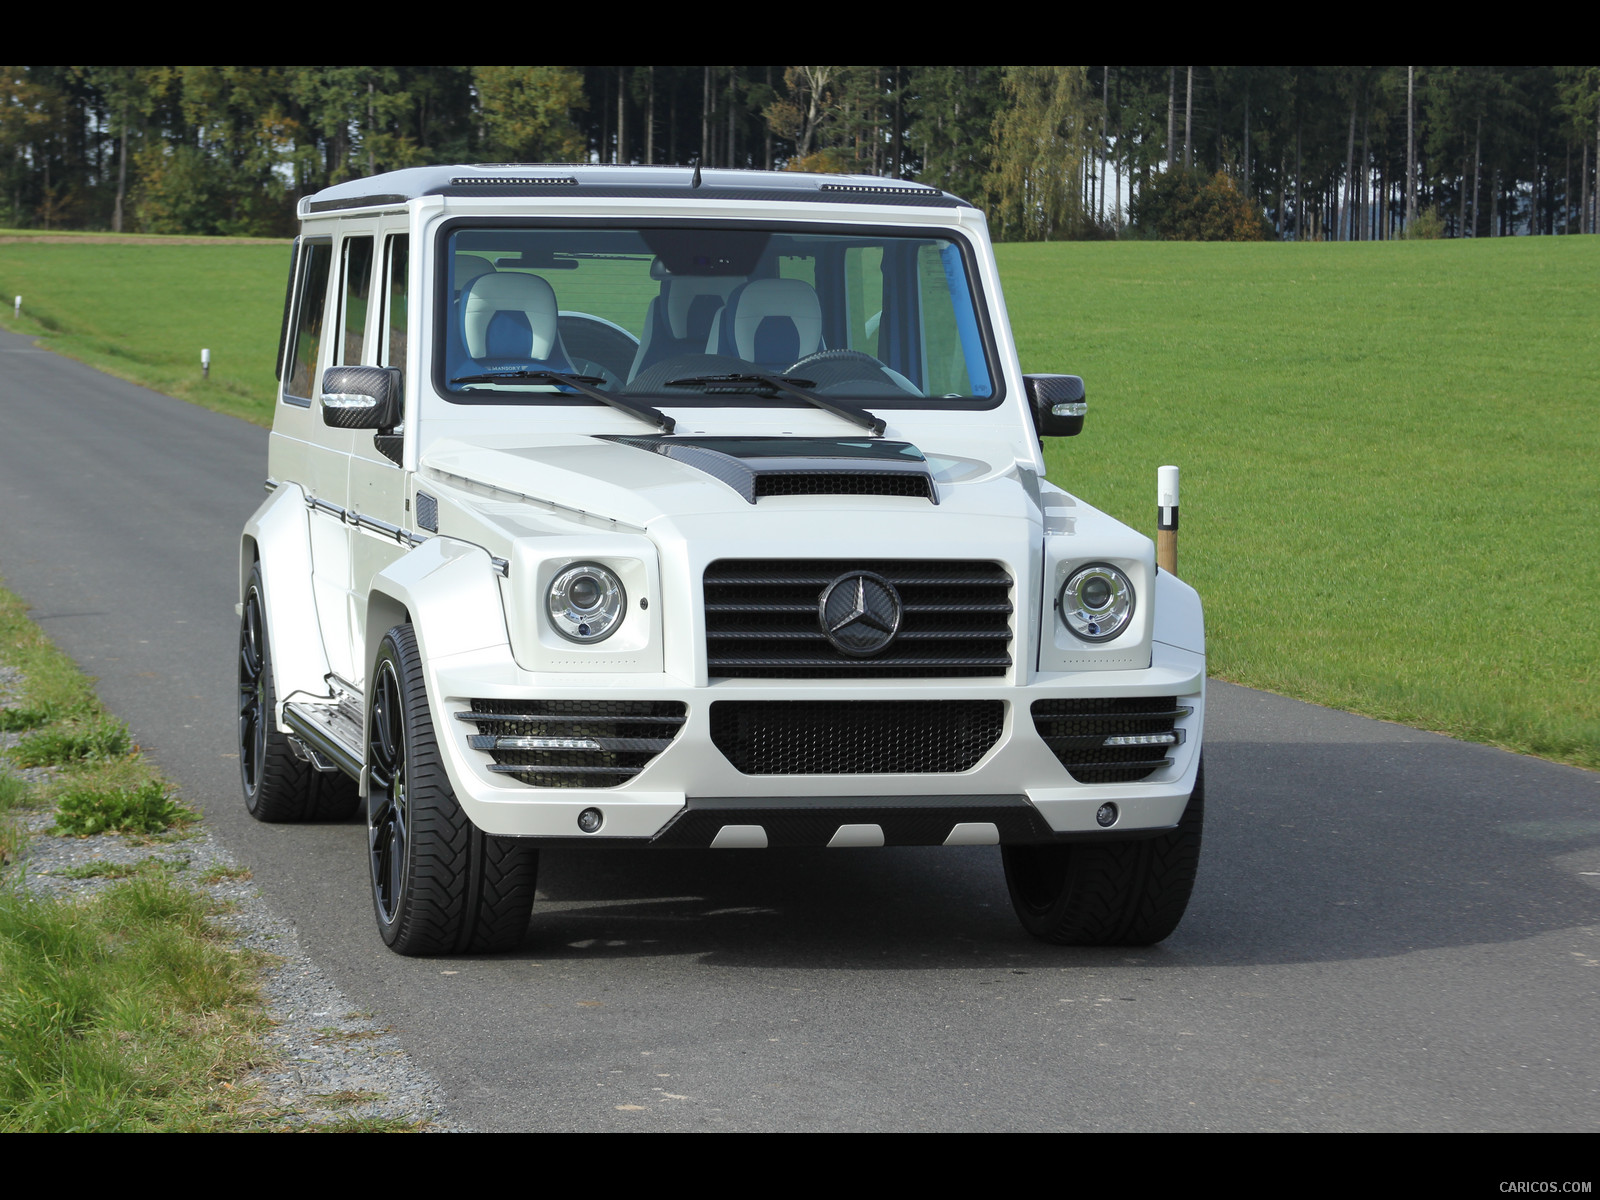 Mansory G-Couture based on Mercedes G-Class White - Front, #22 of 39